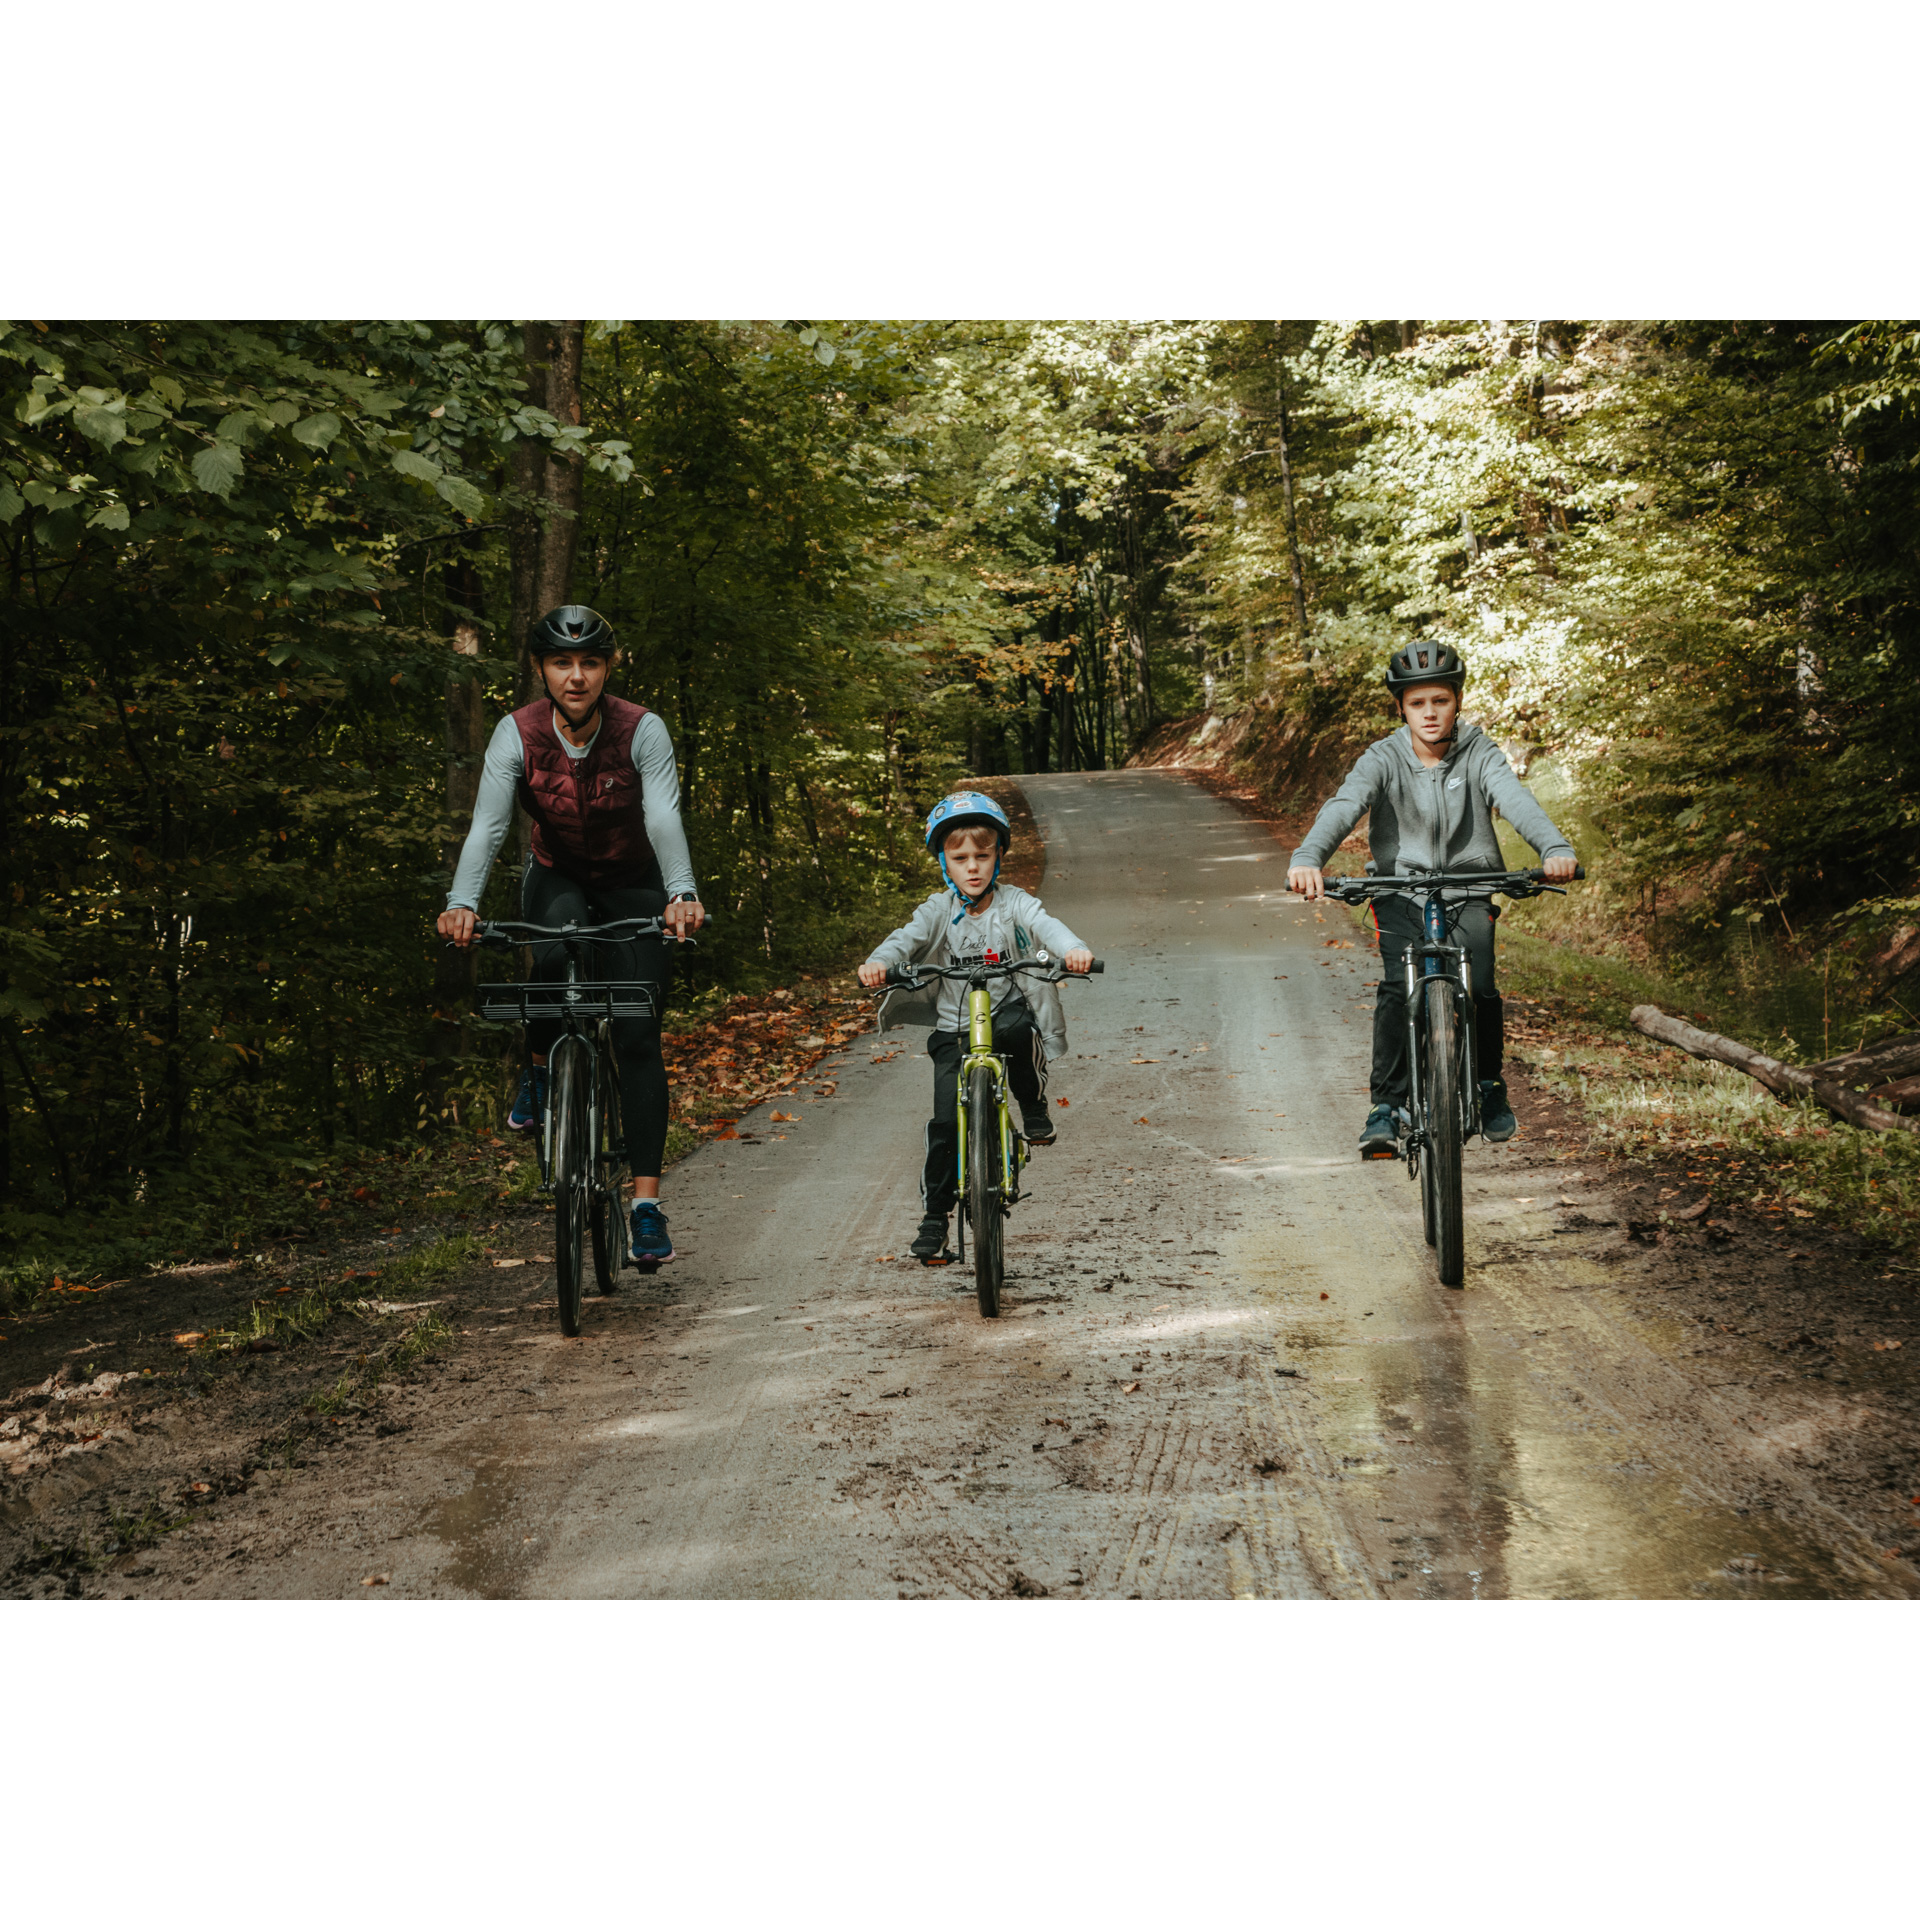 A woman and two boys in helmets cycling along a sandy forest road among green trees